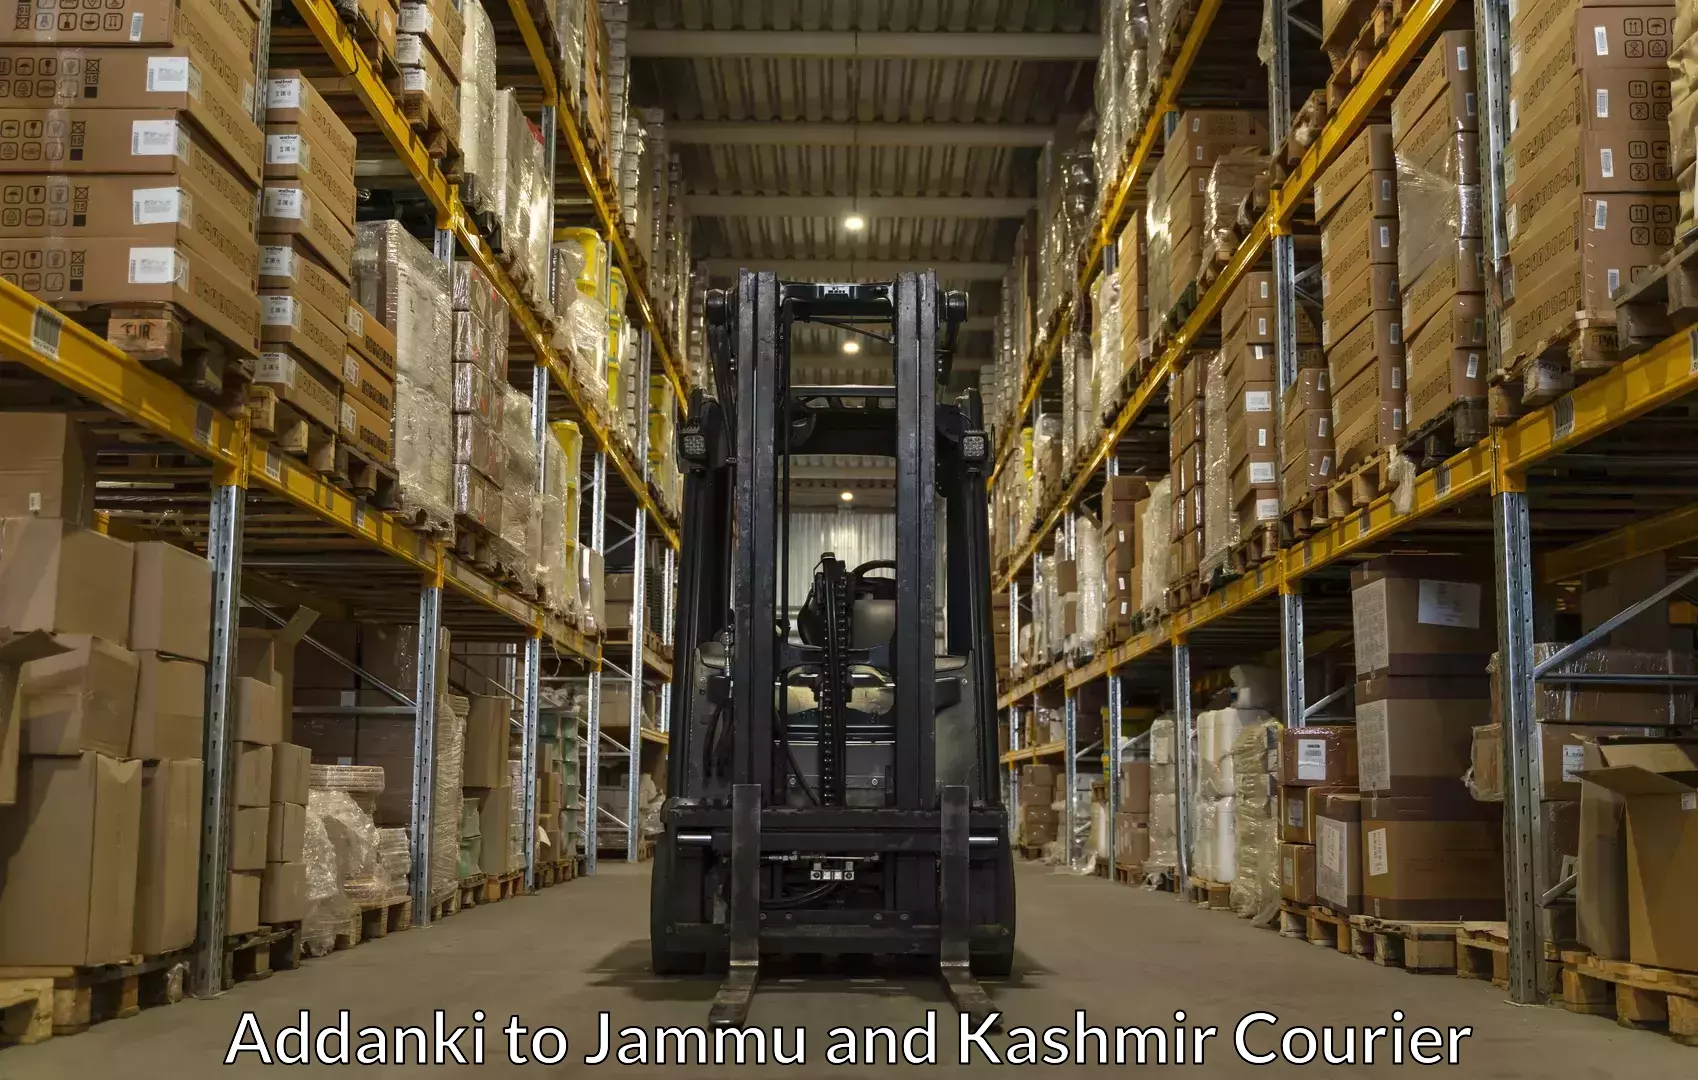 Home relocation experts Addanki to Jammu and Kashmir